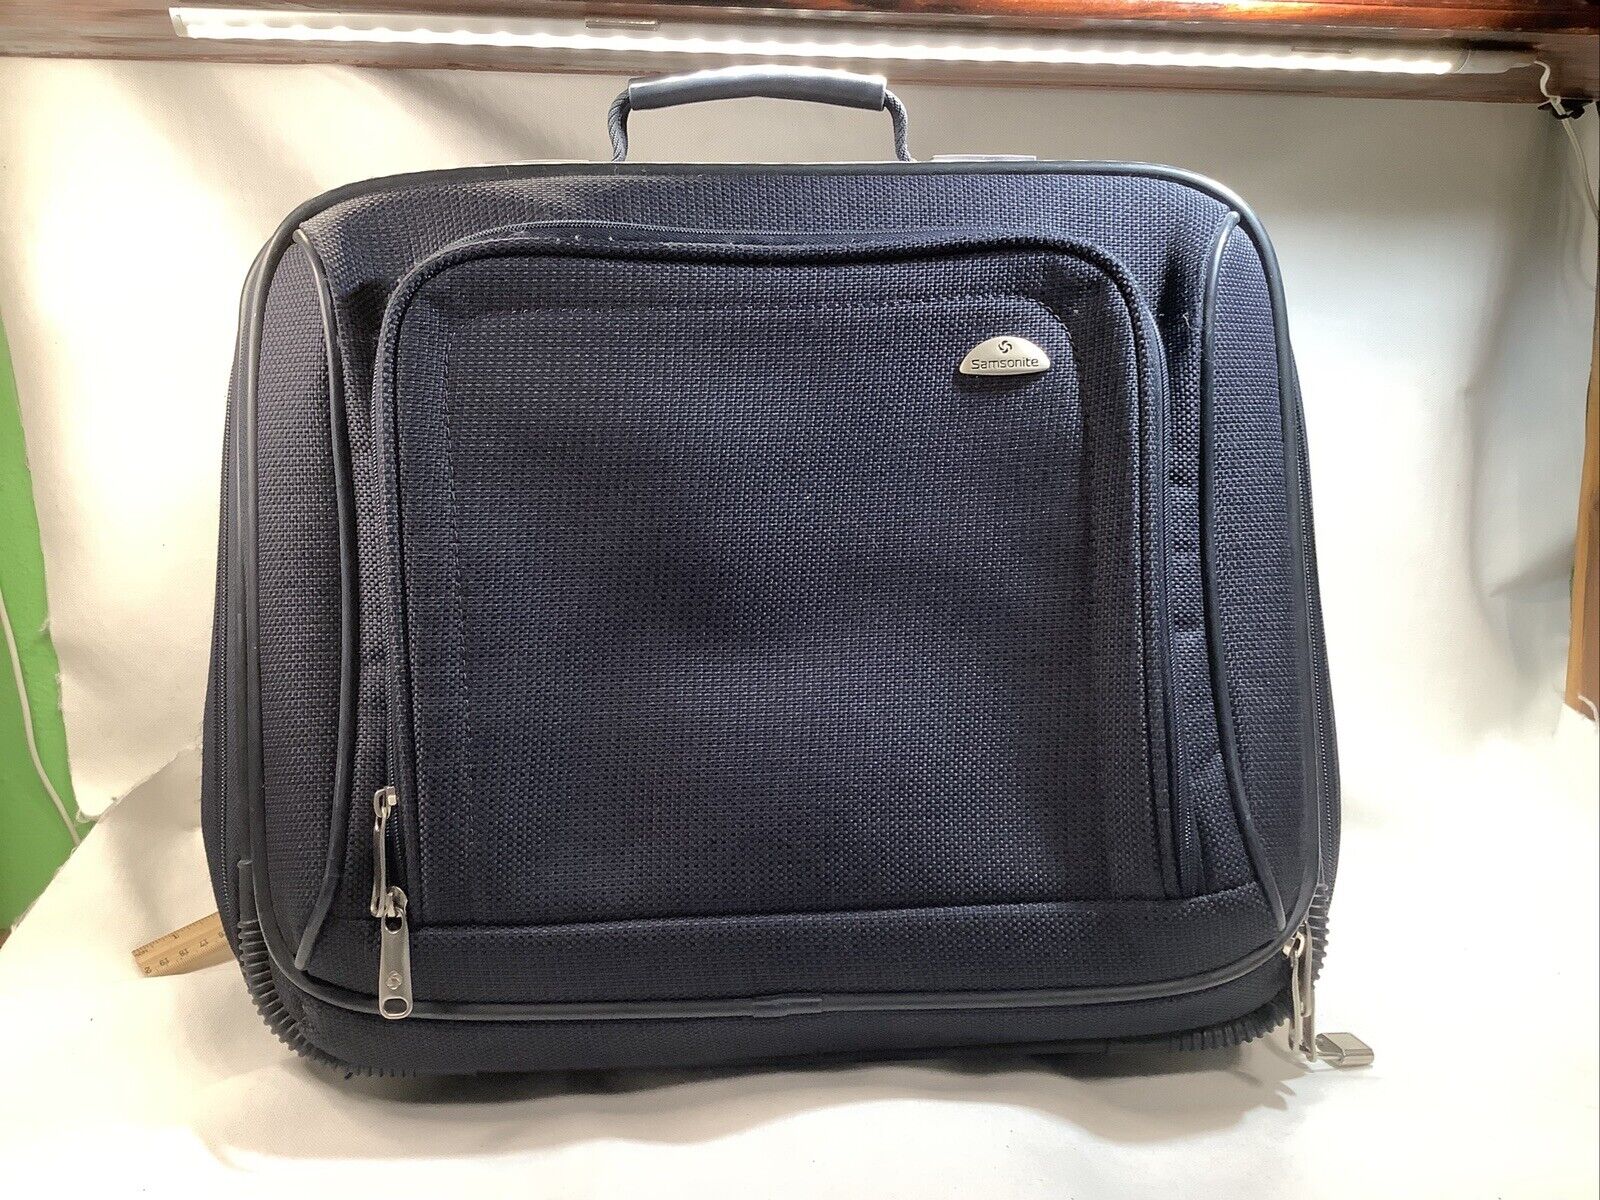 Samsonite Rolling Laptop Briefcase Luggage Travel Bag Carry-On 17.5